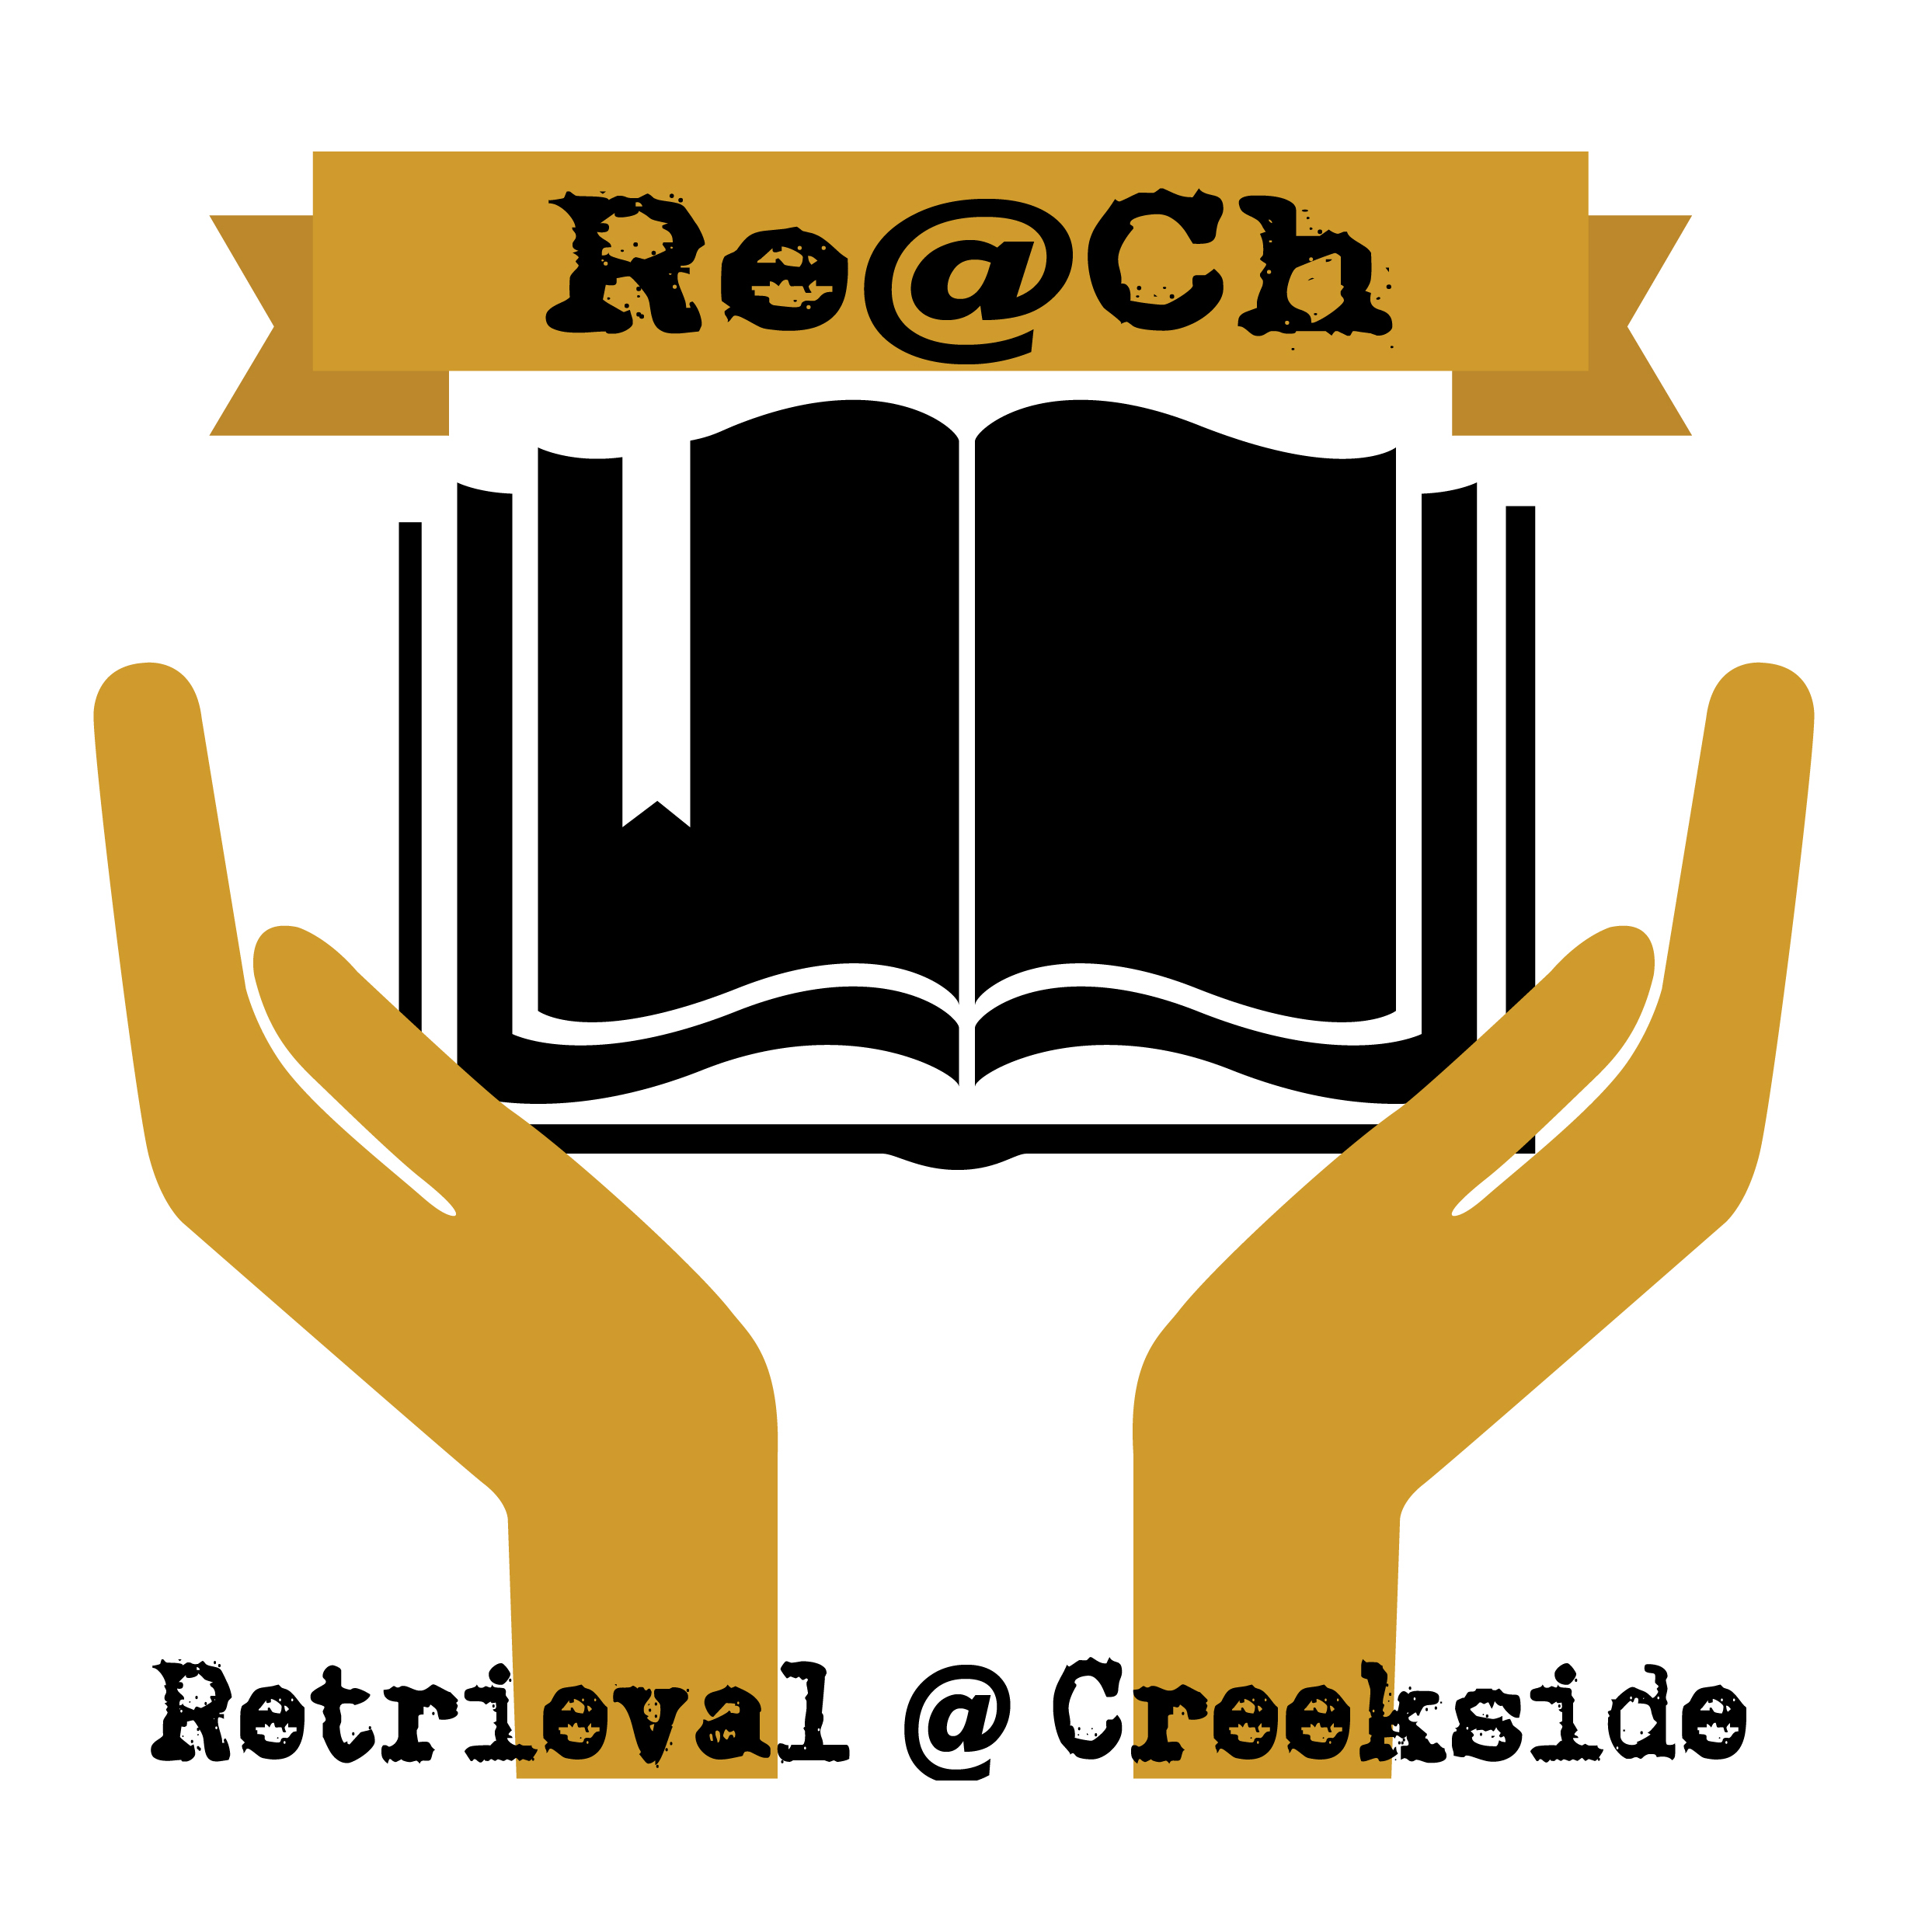 Logo for the book retrieval service, showing two hands holding an open book